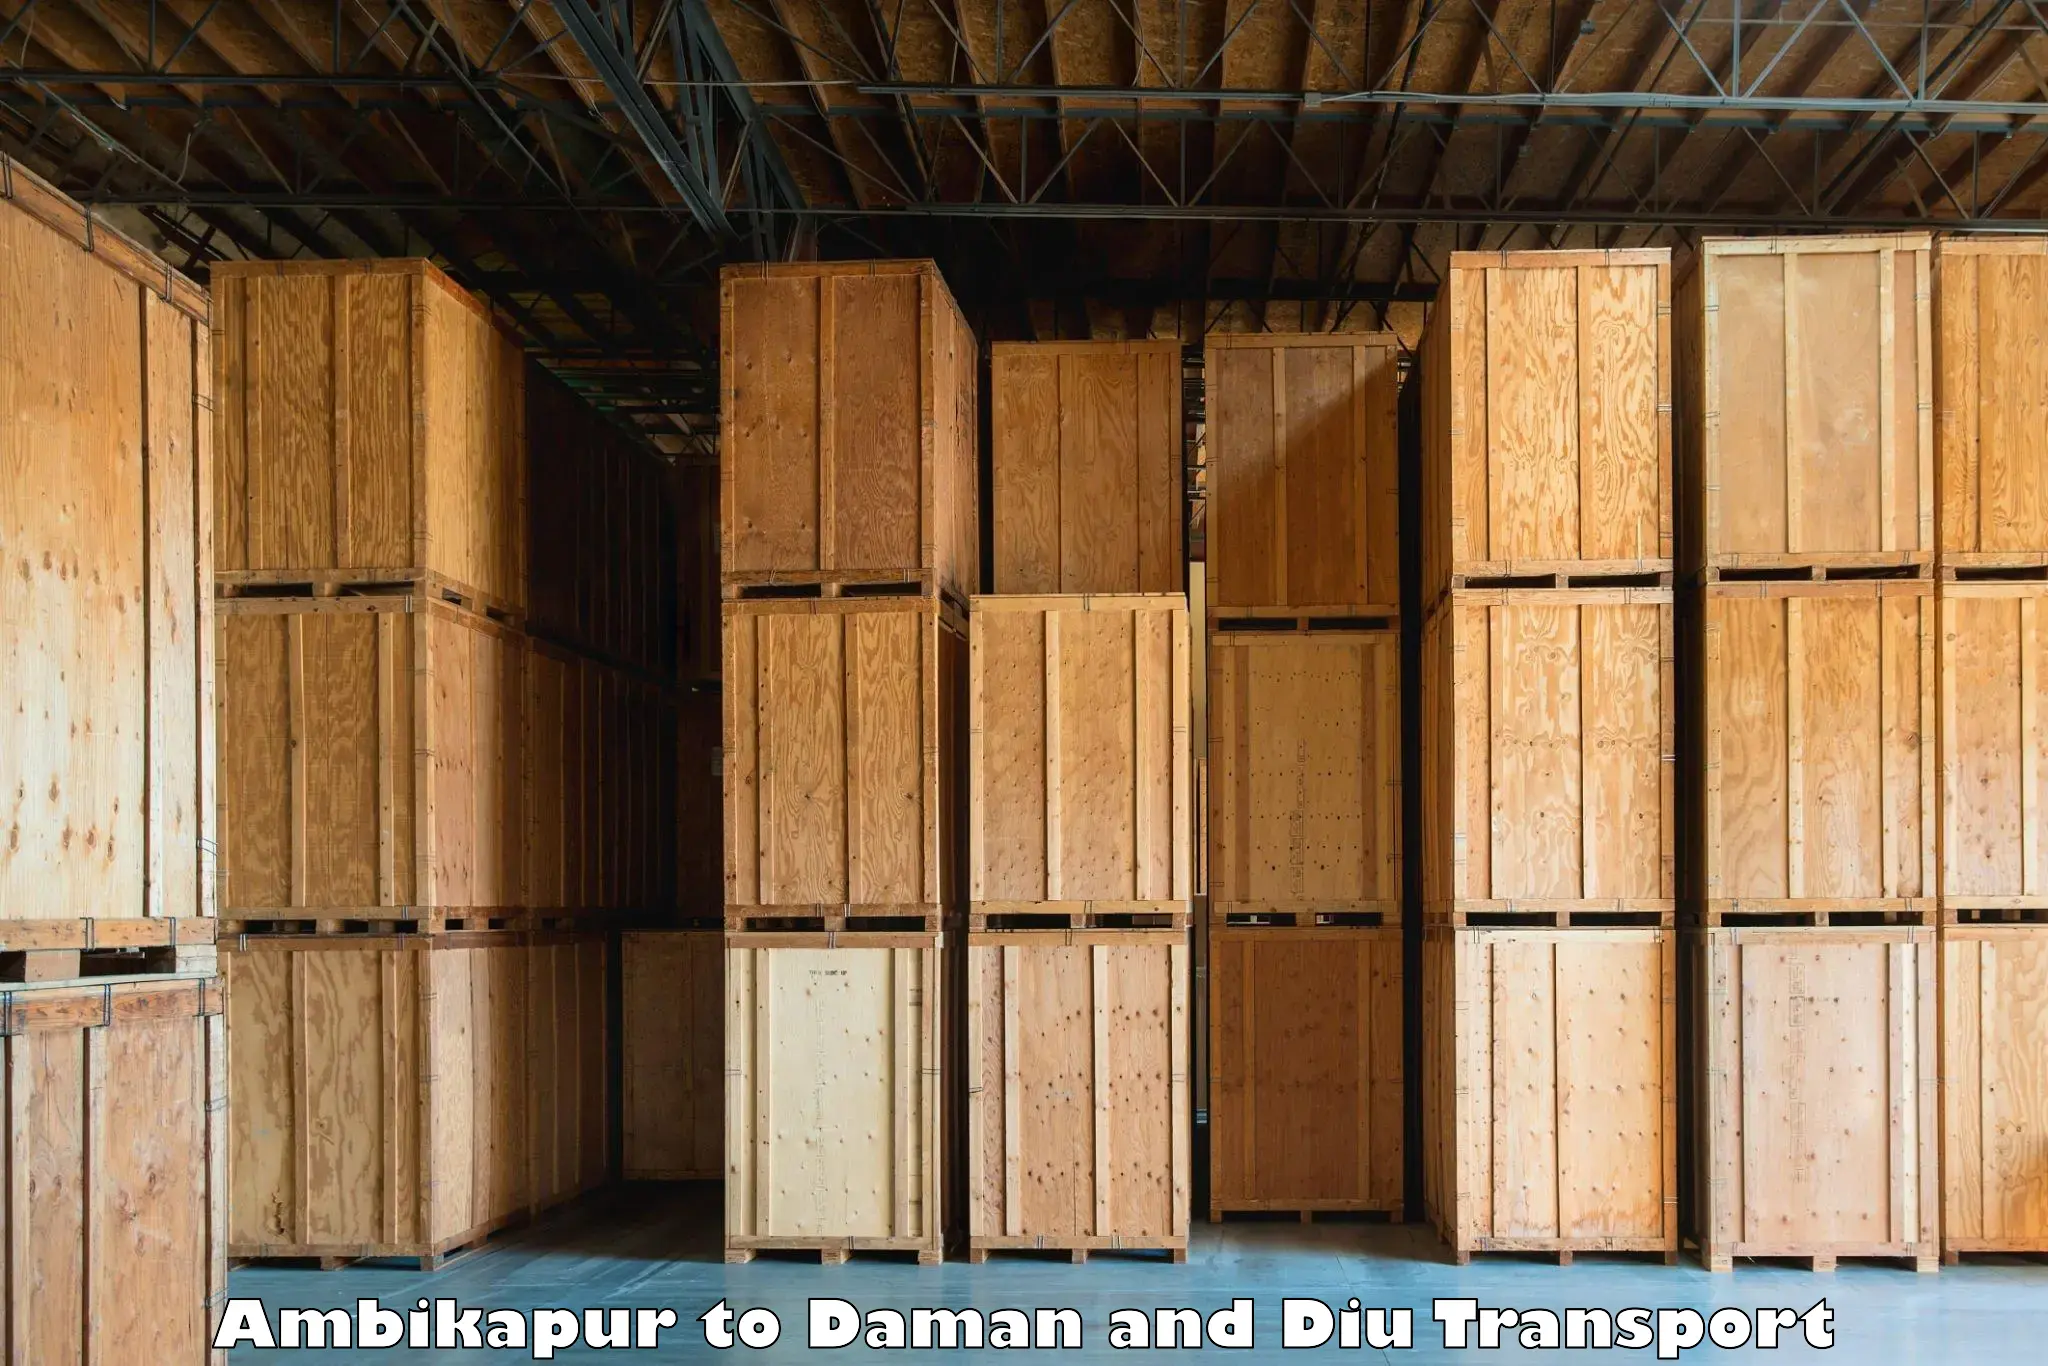 Container transport service Ambikapur to Daman